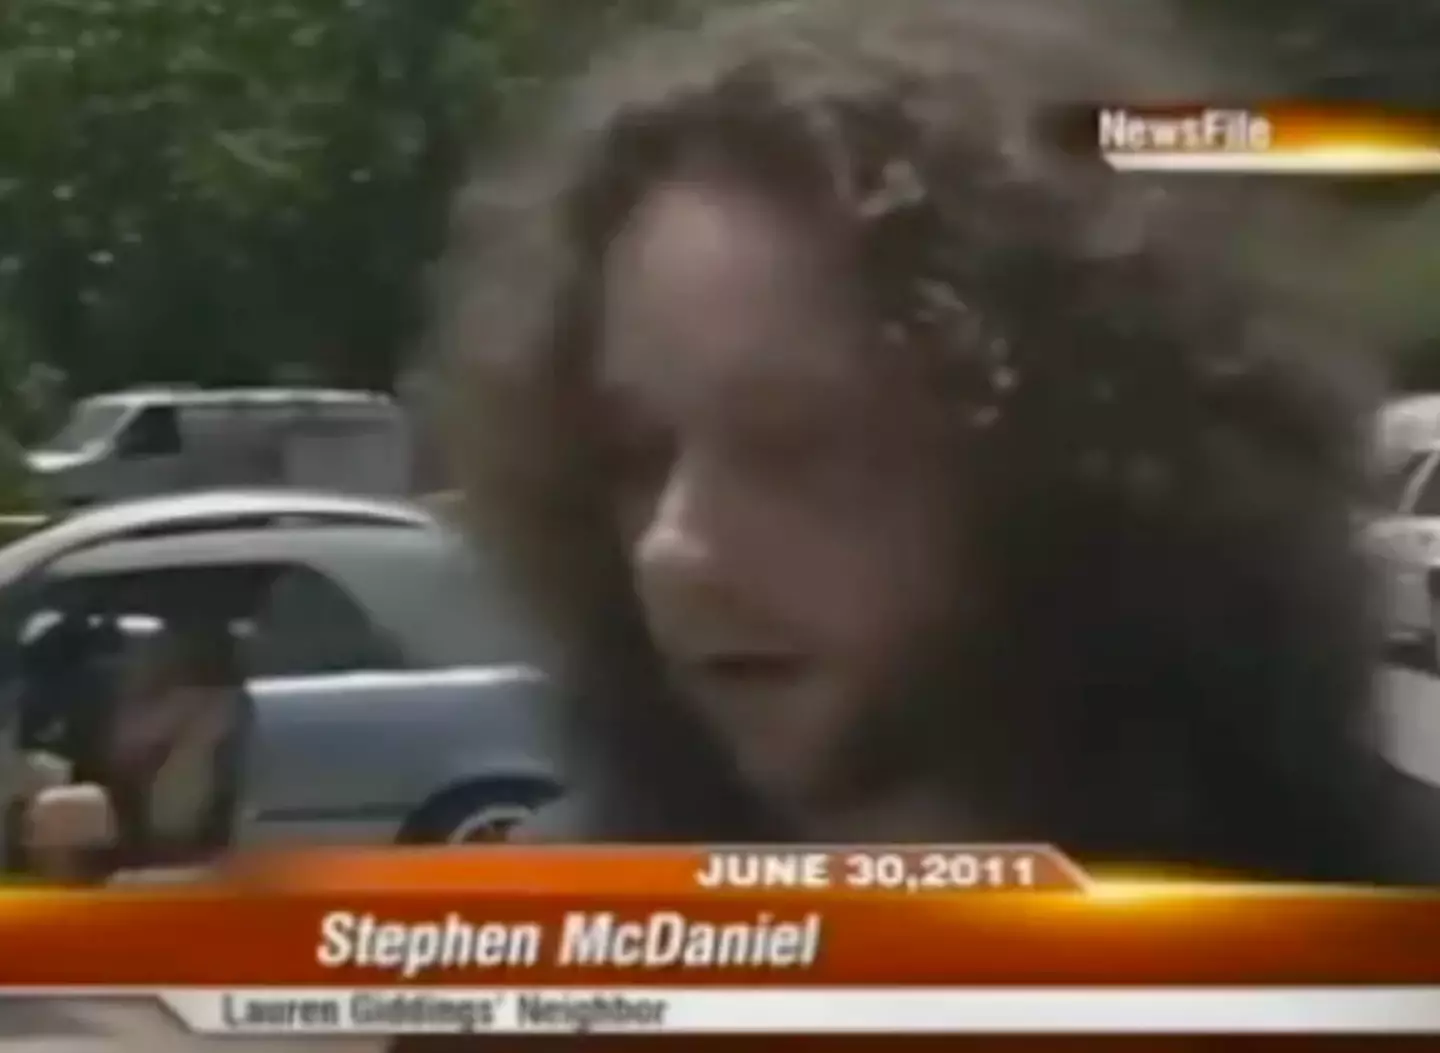 The moment Stephen McDaniel found out the body of his victim had been discovered was captured on live TV.